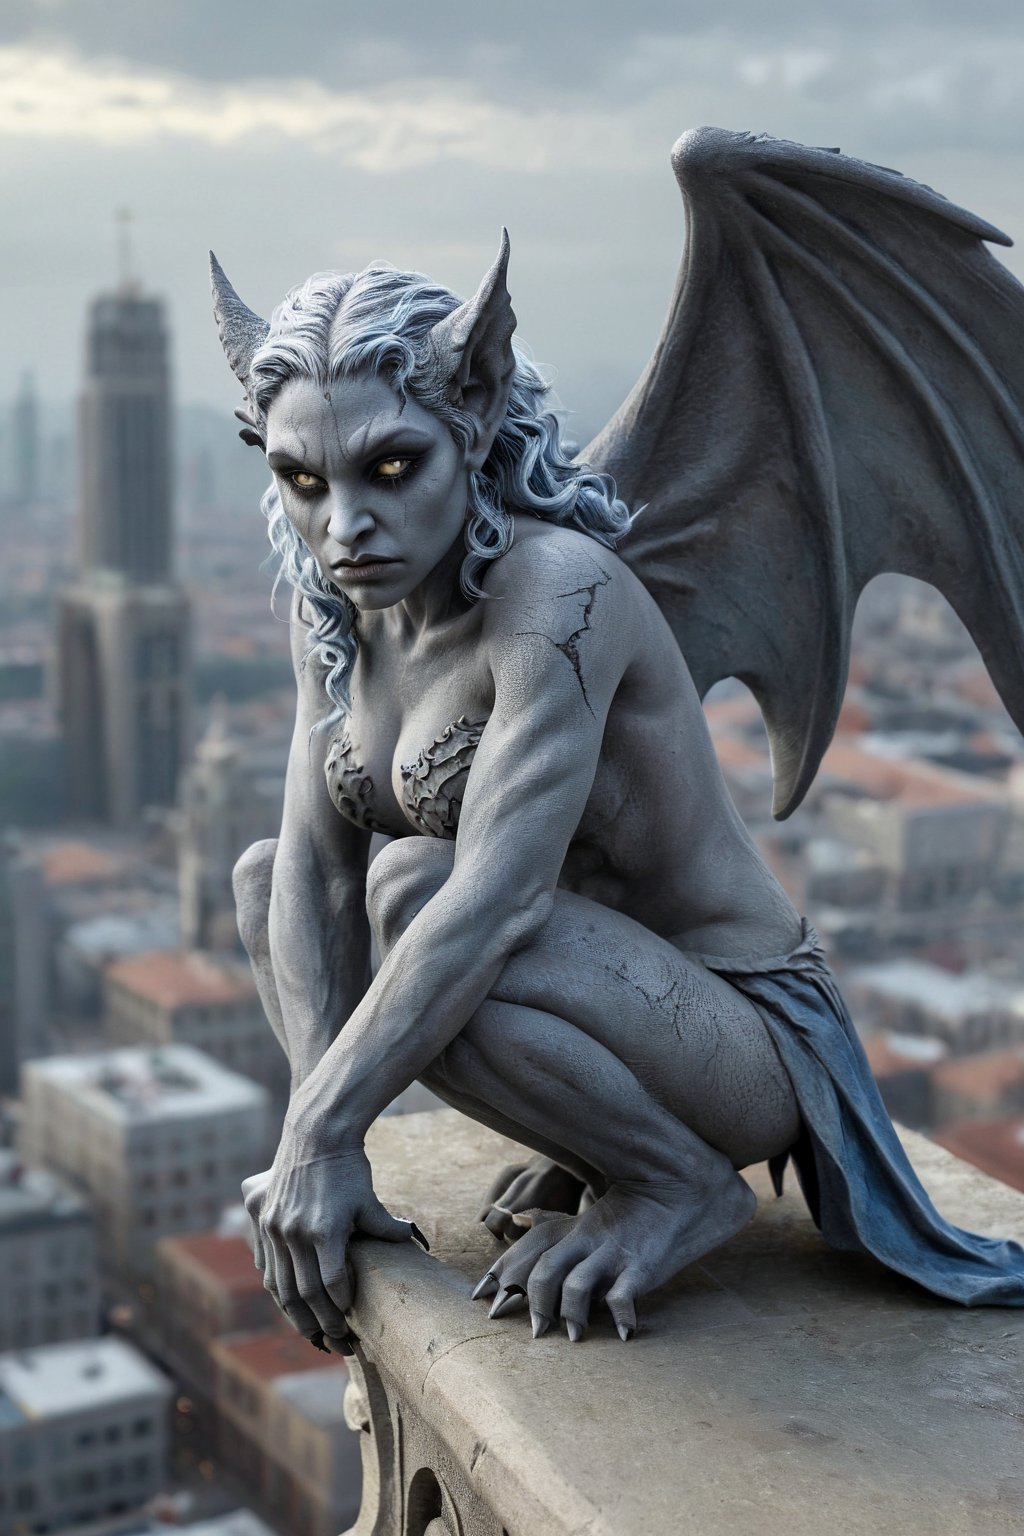 Highly detailed Captivating Gothic fantasy art masterpiece featuring a beautiful gray skin female gargoyle with curly bluish hair standing high above the city leaning forward to watch the people down below. Style of artist Anne Stokes, this dramatic and beautiful portrait transcends into the realms of dark fantasy with intricate details., photo, 3d render, cinematic